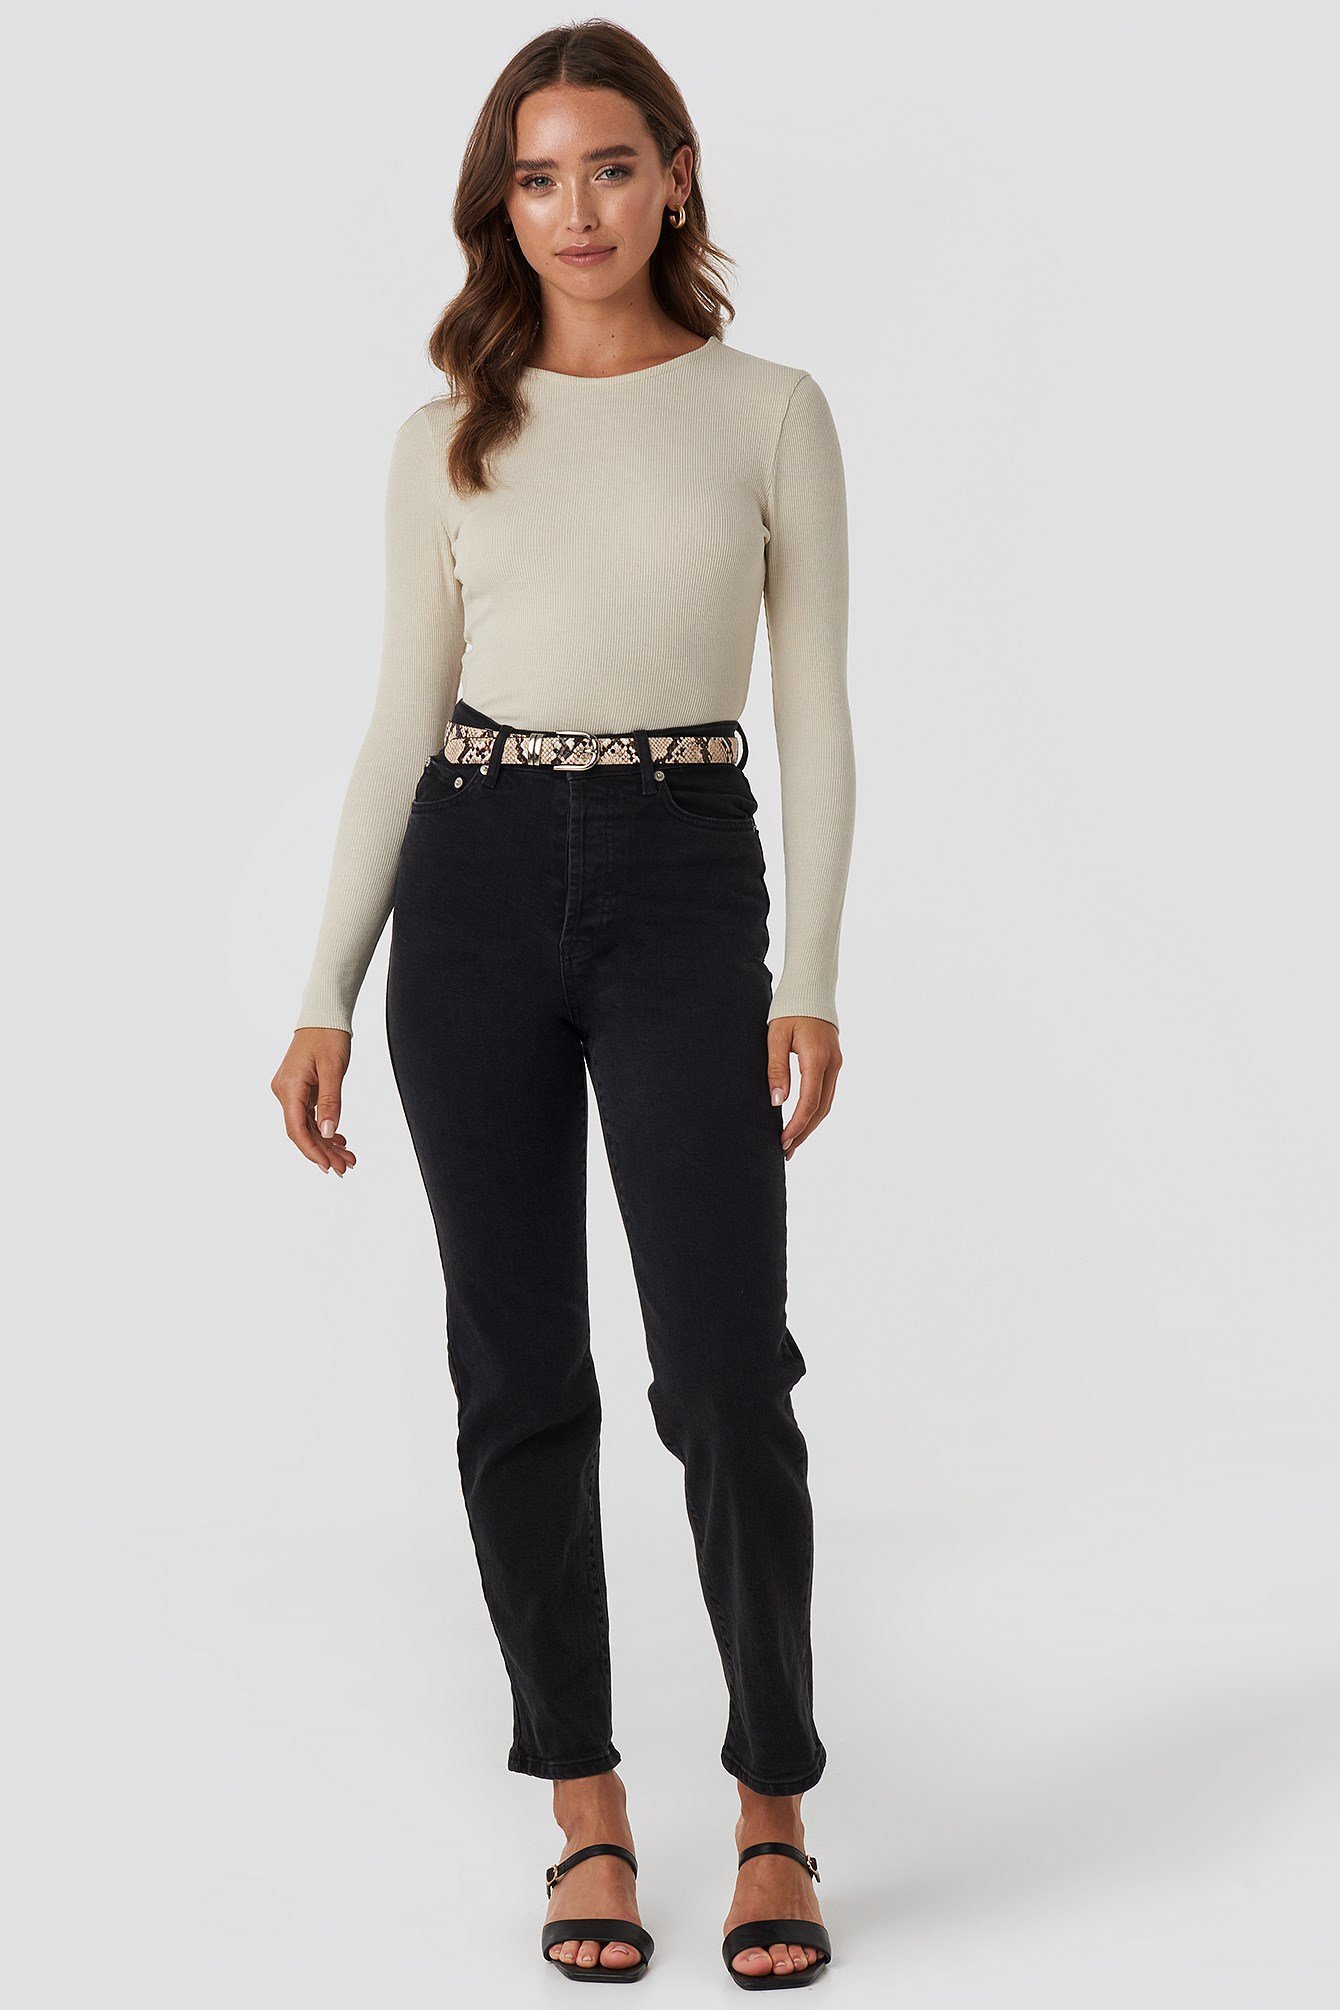 Straight High Waist Jeans Black Outfit